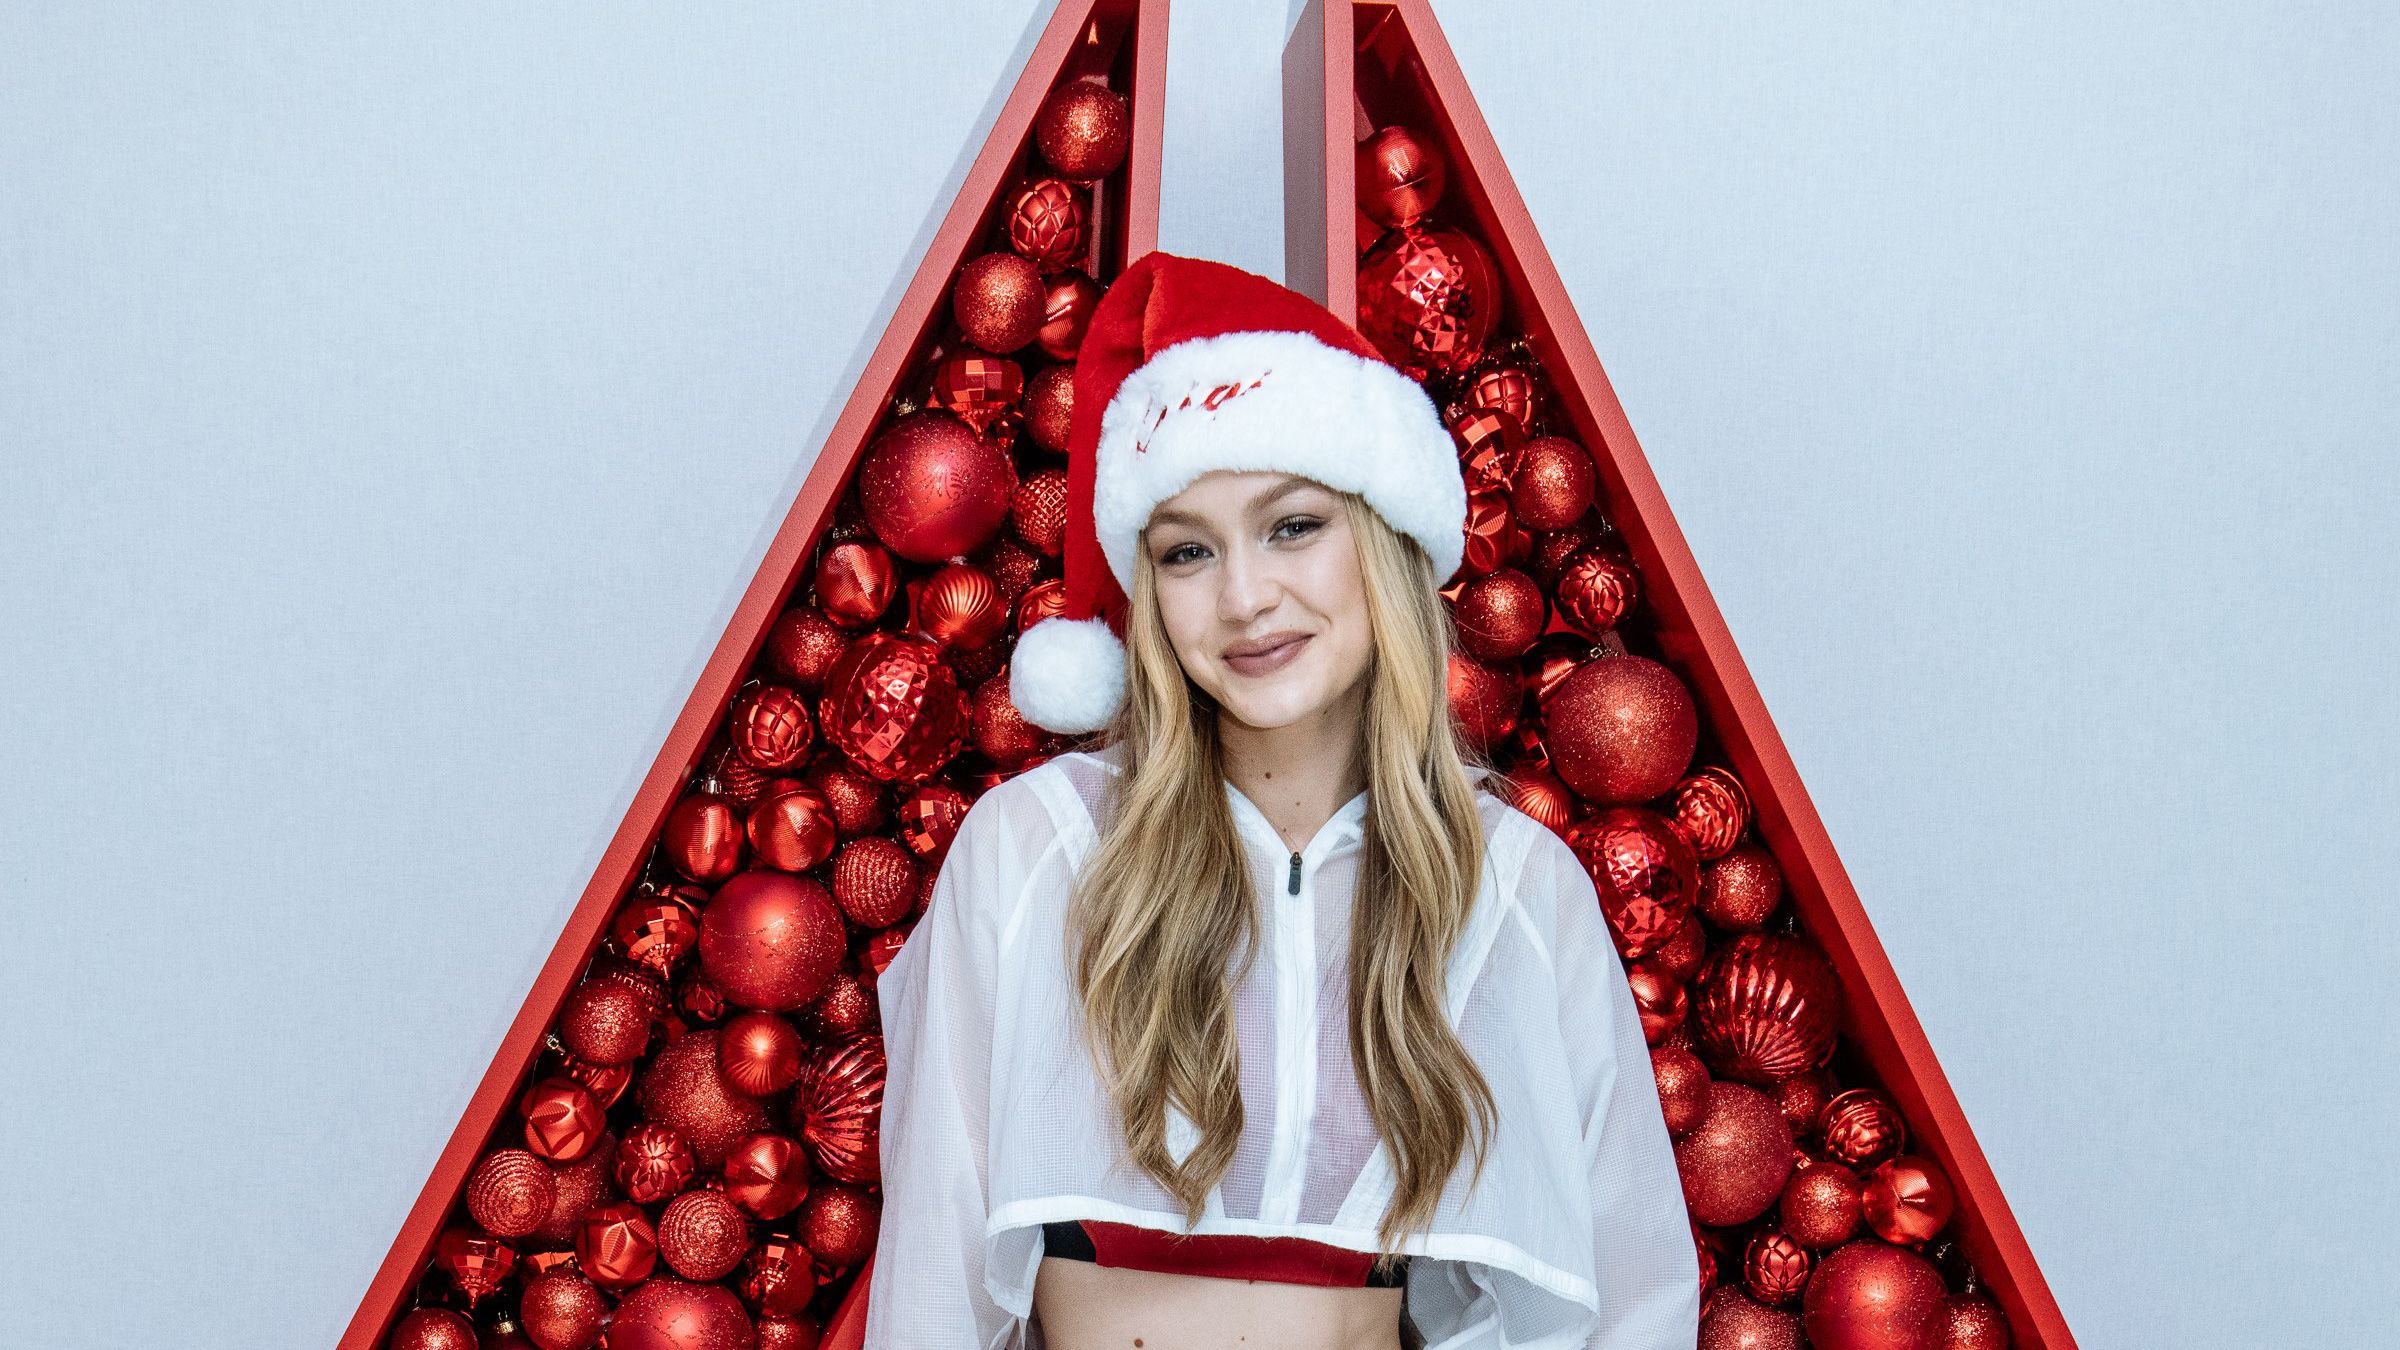 Gigi Hadid Reebok Christmas Event, HD Celebrities, 4k Wallpaper, Image, Background, Photo and Picture